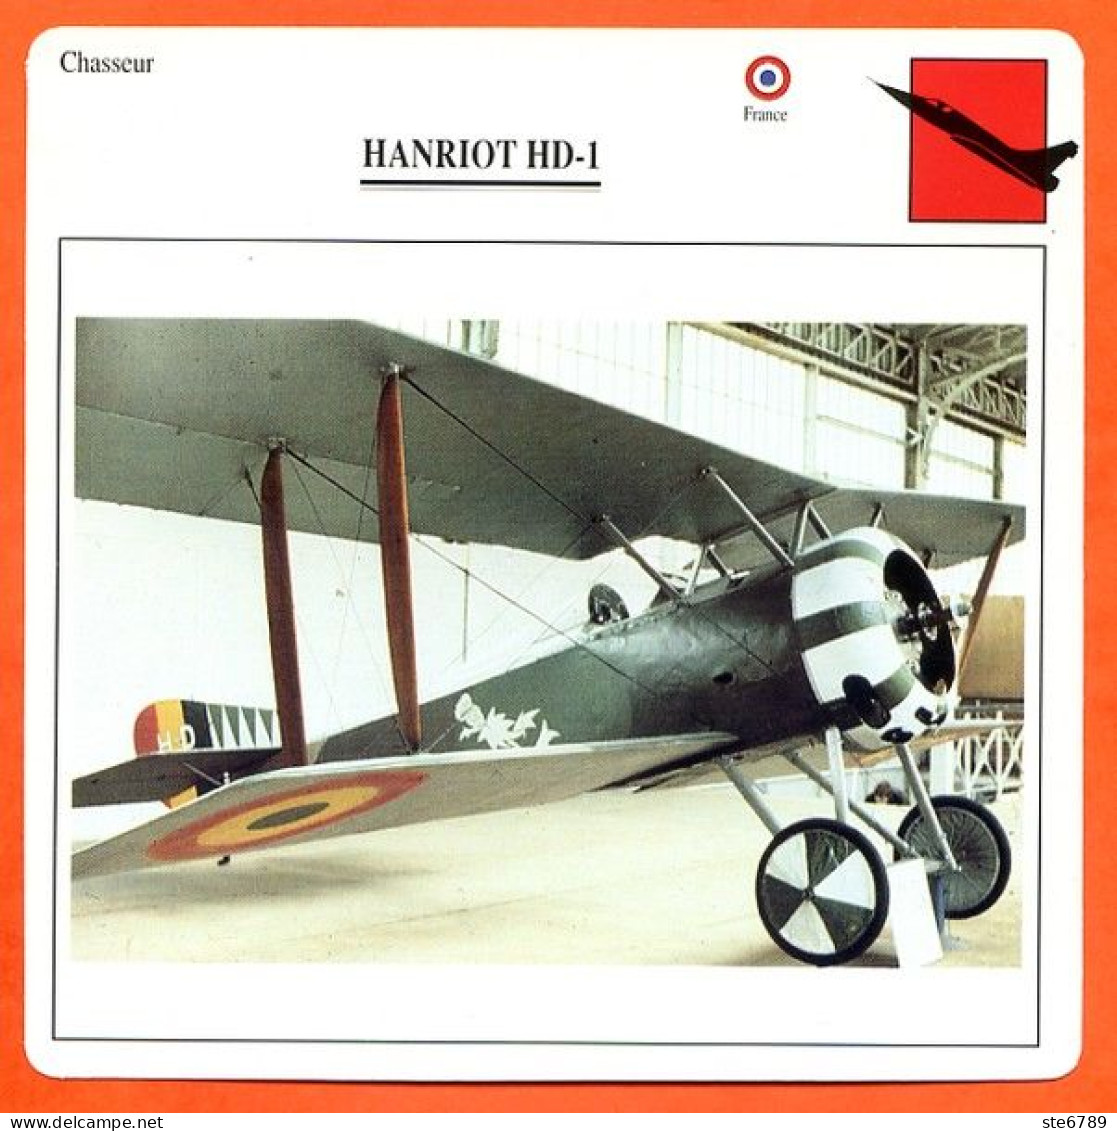 Fiche Aviation HANRIOT HD 1 / Avion Chasseur France Avions - Airplanes